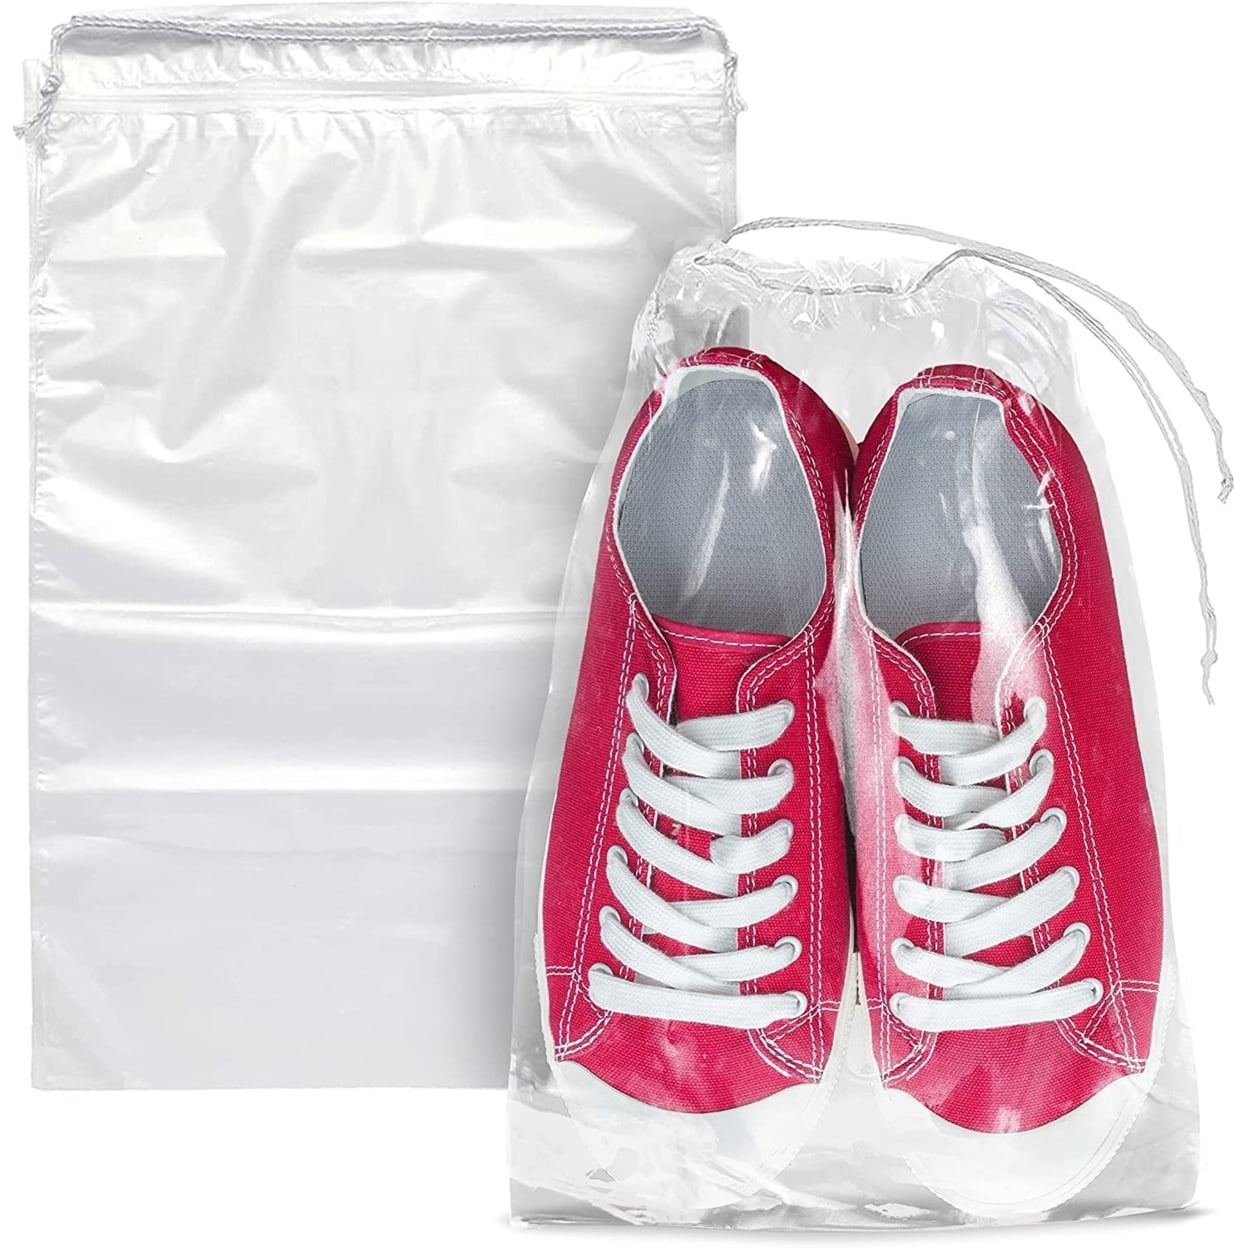 APQ Clear Drawstring Bags 10 x 14, Pack of 50 Travel Shoe Bags for  Packing, 2 mil Drawstring Gift Bags, Waterproof Travel Shoe Bag, Shoe Bags  for